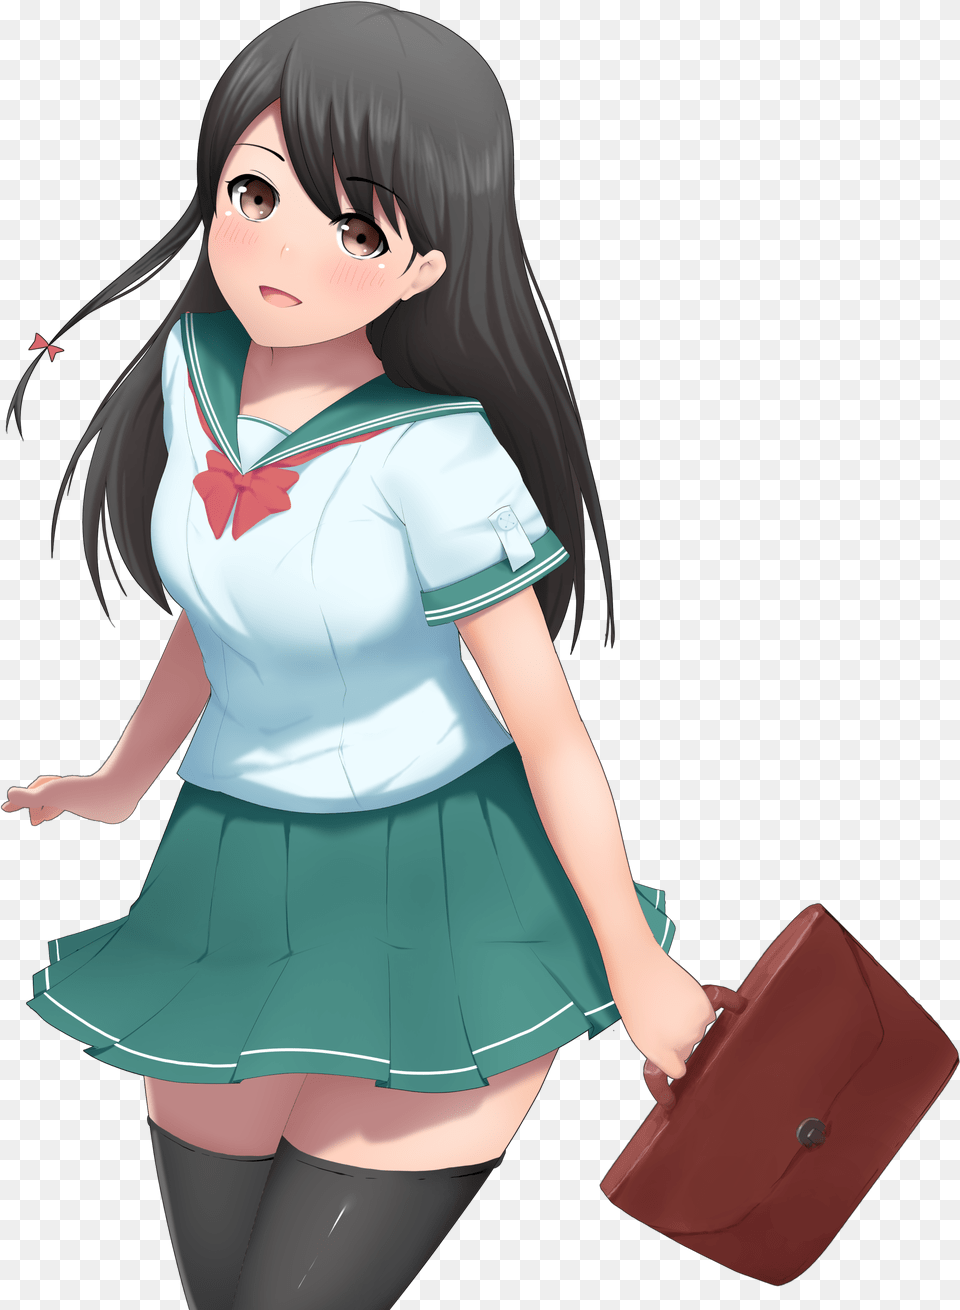 Download Anime Girl Transparent Images Transparent Anime Girl, Publication, Book, Comics, Accessories Free Png